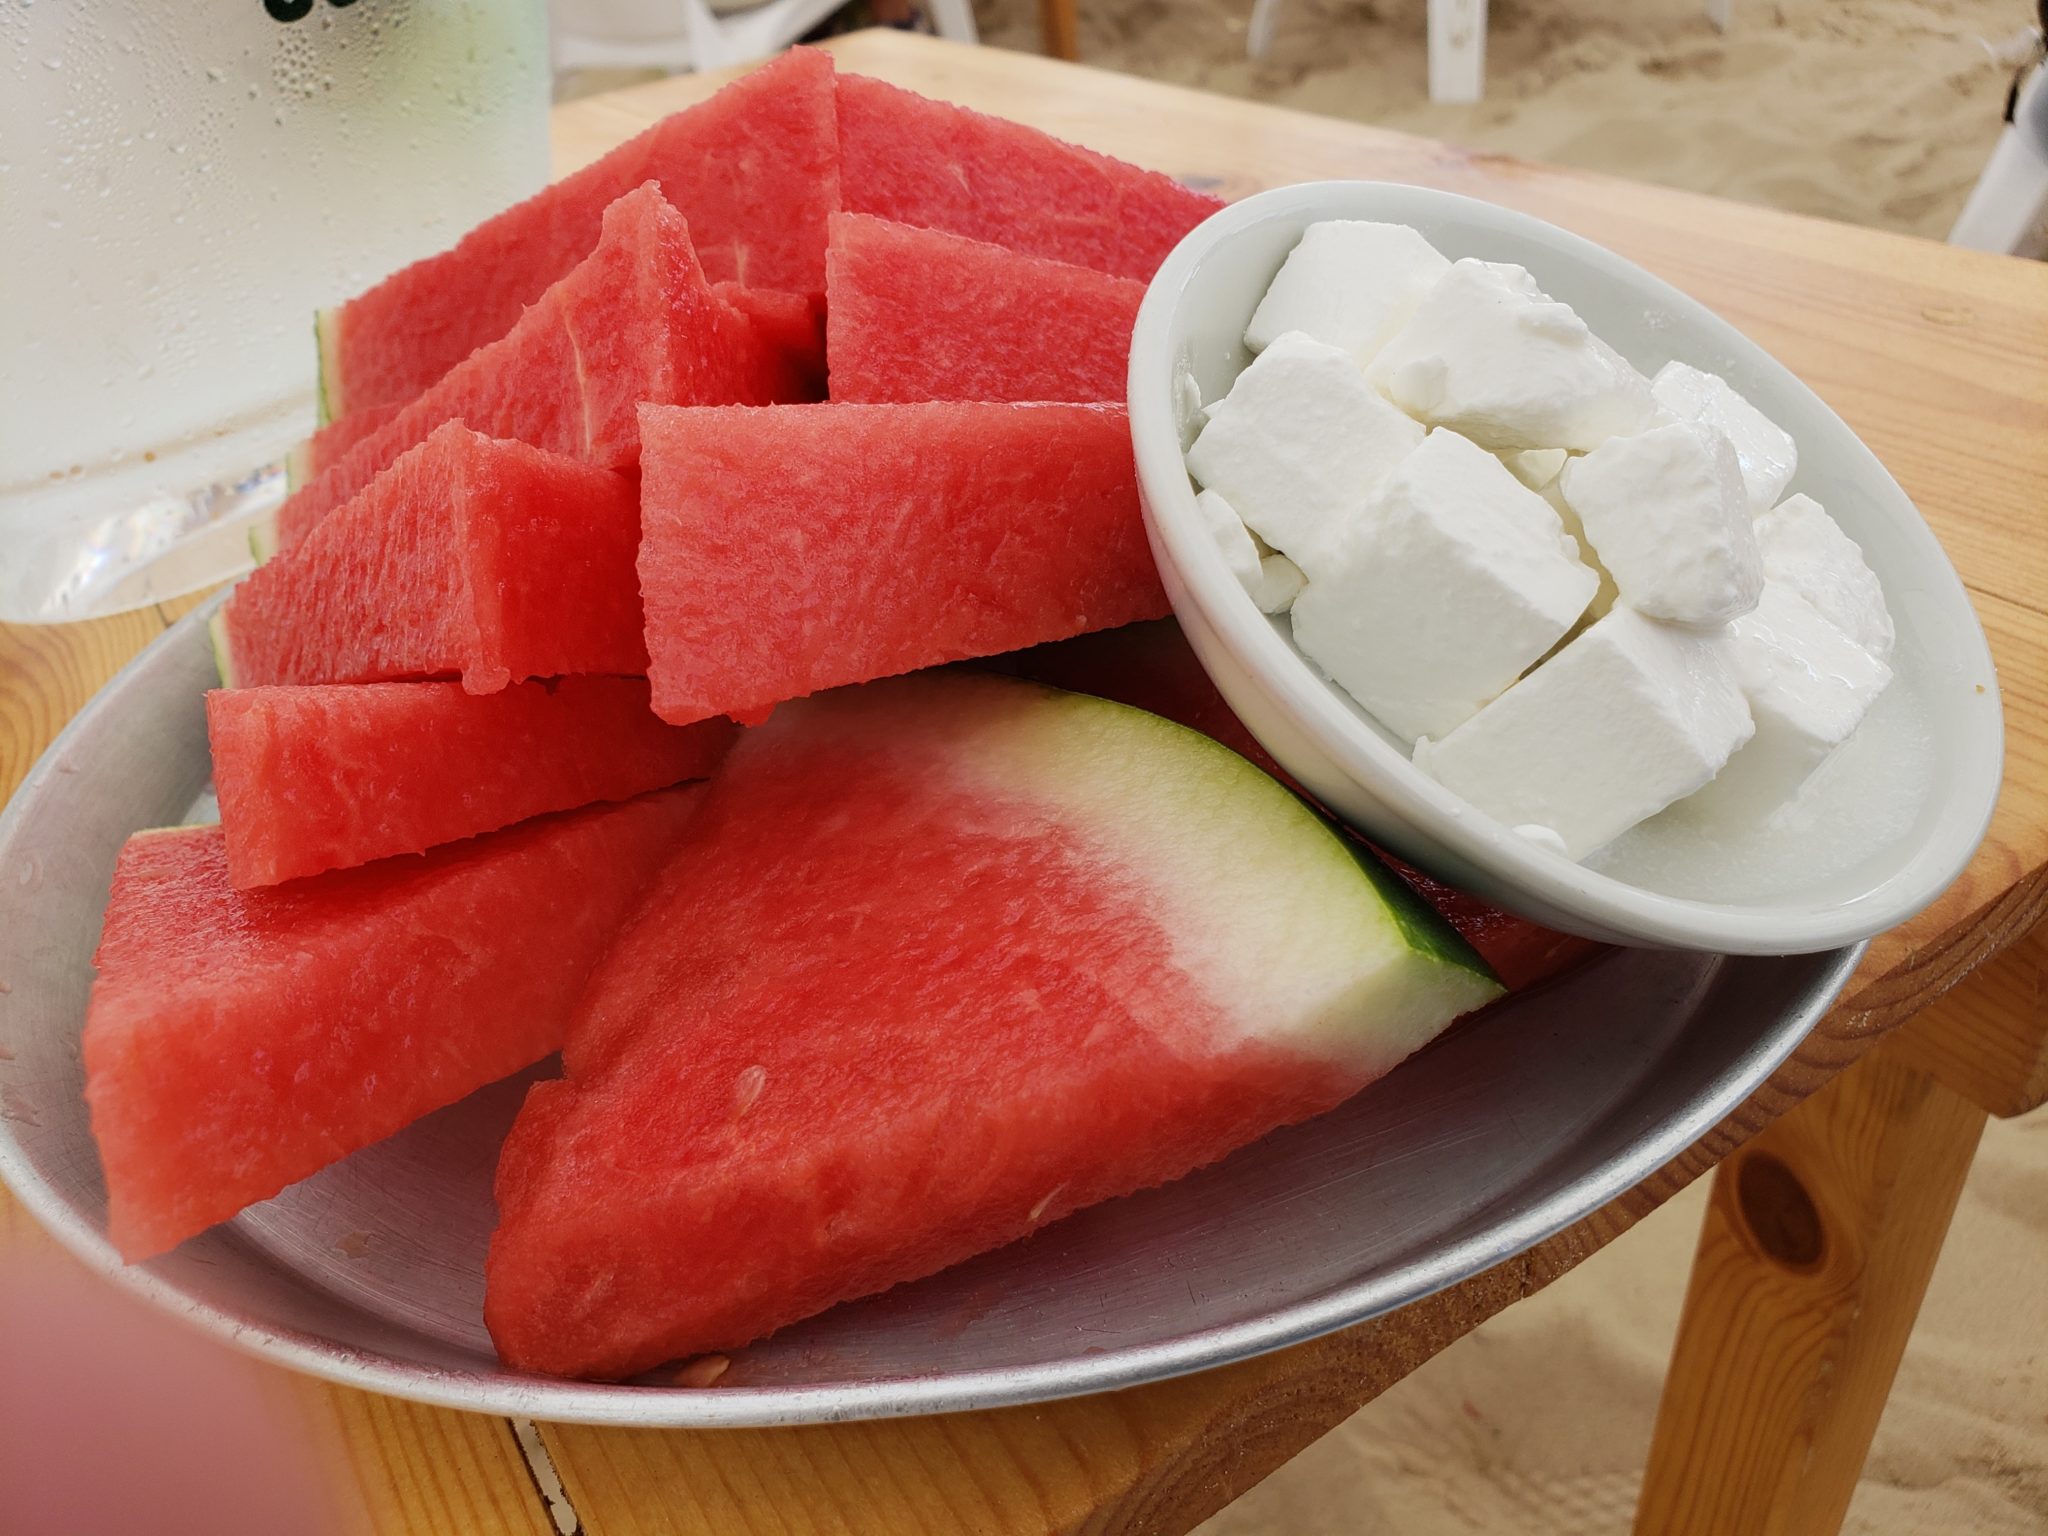 a plate of watermelon slices and white cheese